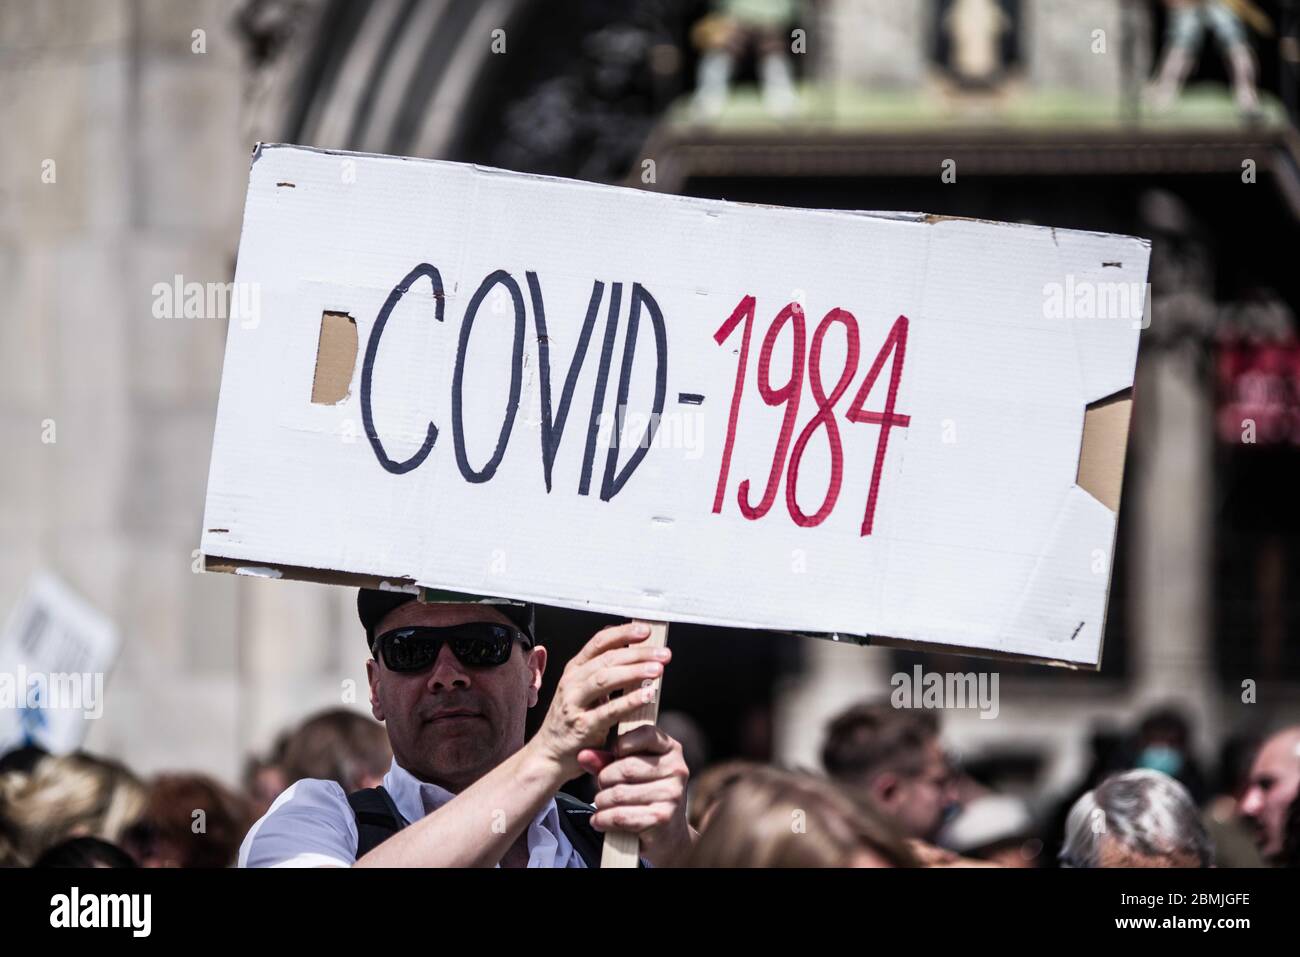 Munich, Bavaria, Germany. 9th May, 2020. Covid 1984 slogans referring to the Orwell book. Despite ongoing relaxing measures, a "Querfront"" (cross-front) mixture of 3,000 conspiracy theorists, QAnon followers, right-extremists, AfD figures, neonazis, hooligans, and Widerstand2020 assembled for a third weekend in Munich's city center, primarily at Marienplatz, to demonstrate for restoration of the Grundgesetz amid the Coronavirus crisis. Such demos and daily mini-demos with an overwhelming 2015-2016 Pegida quality are being staged throughout Germany, with two attacks on journalists for ARD Stock Photo